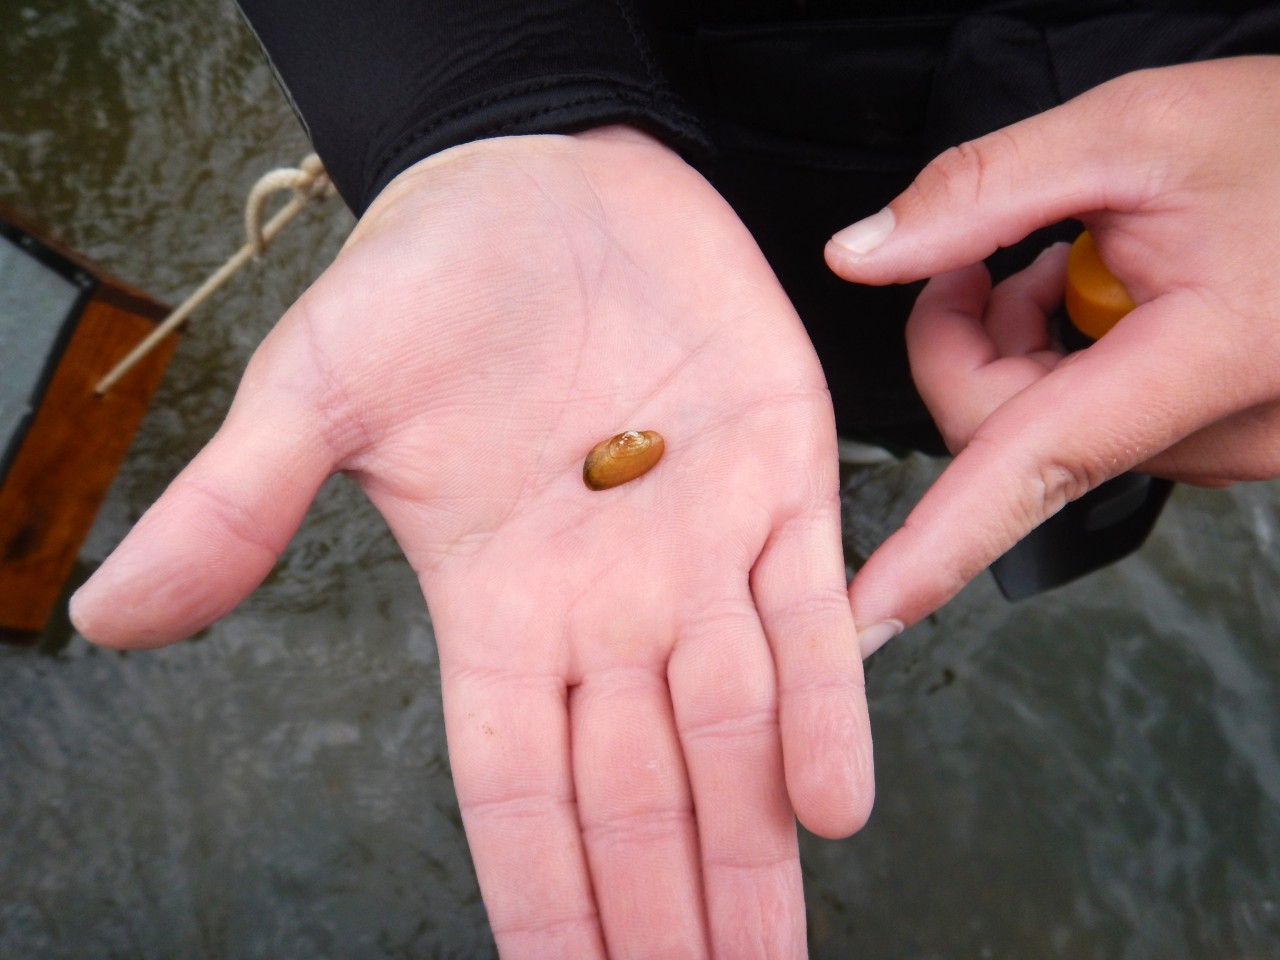 A juvenile mussel in the center of an open hand